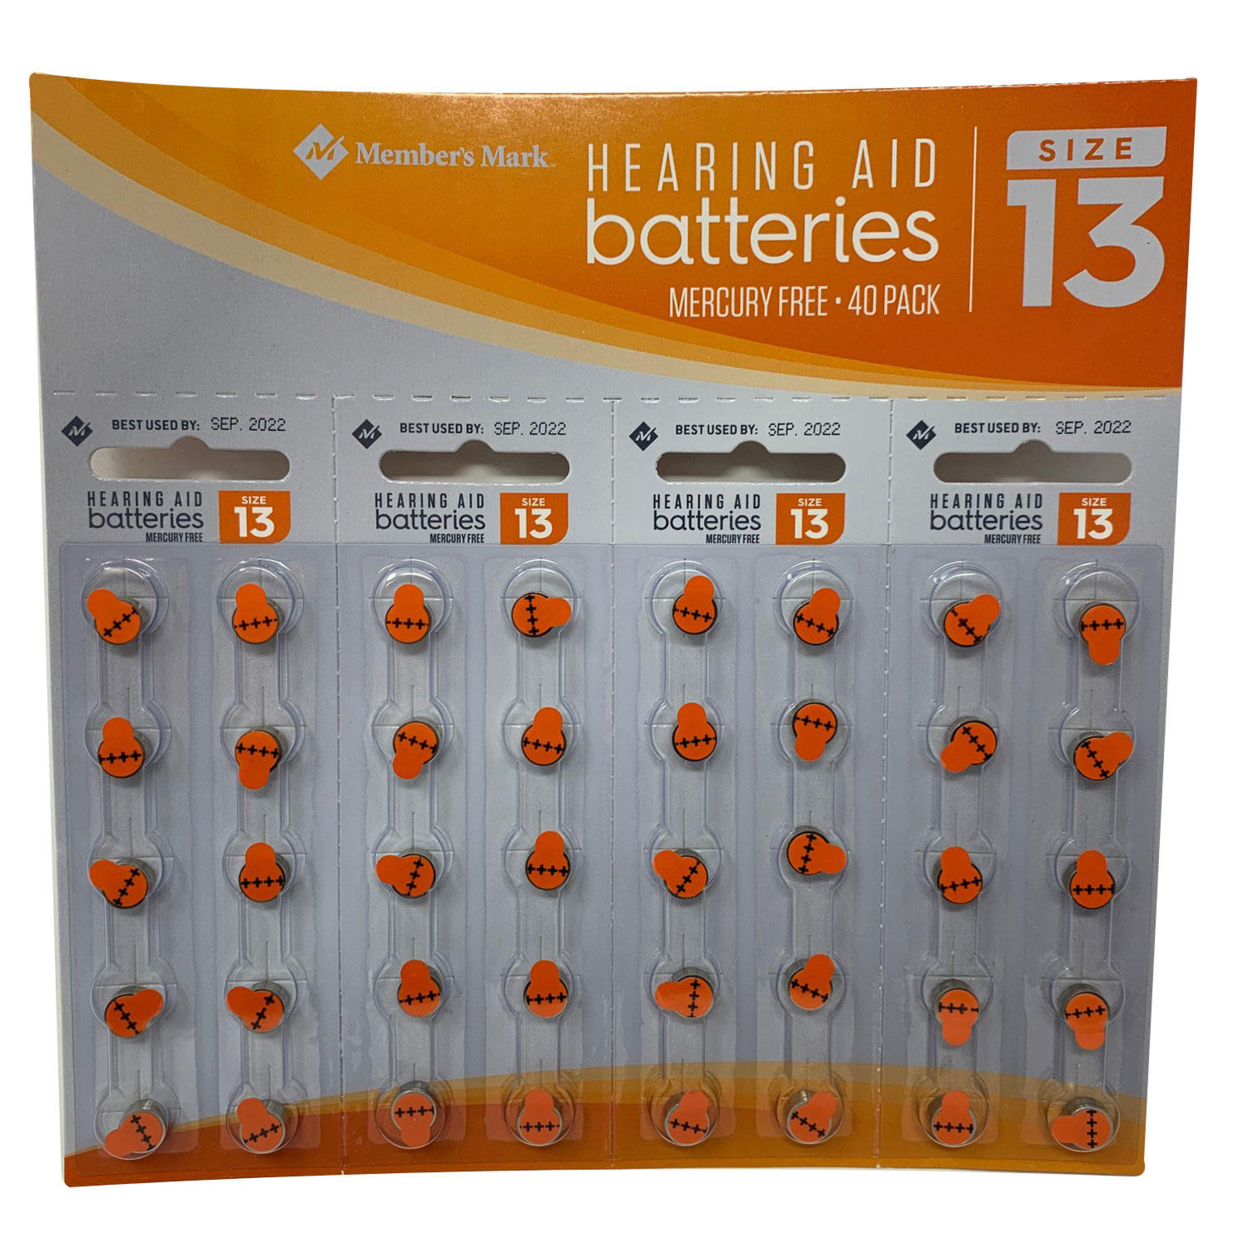 Members Mark Hearing Aid Batteries, Size 13 (40 Count)